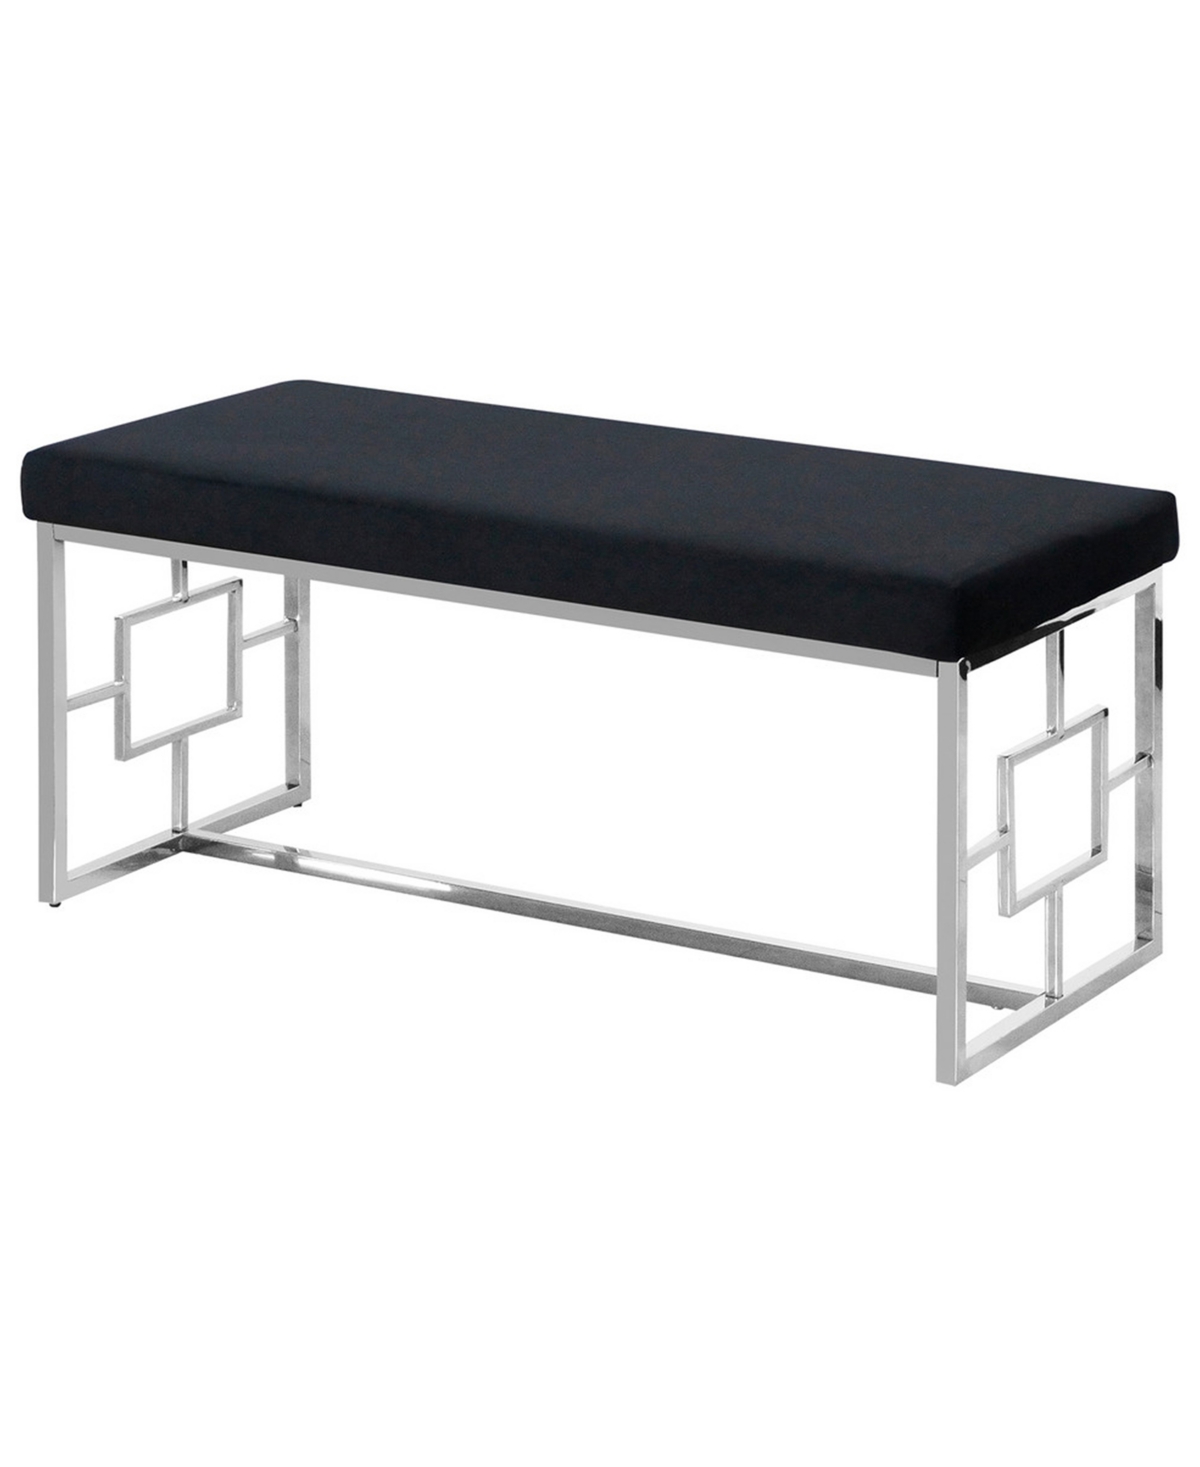 12857346 Louie Stainless Steel Bench sku 12857346